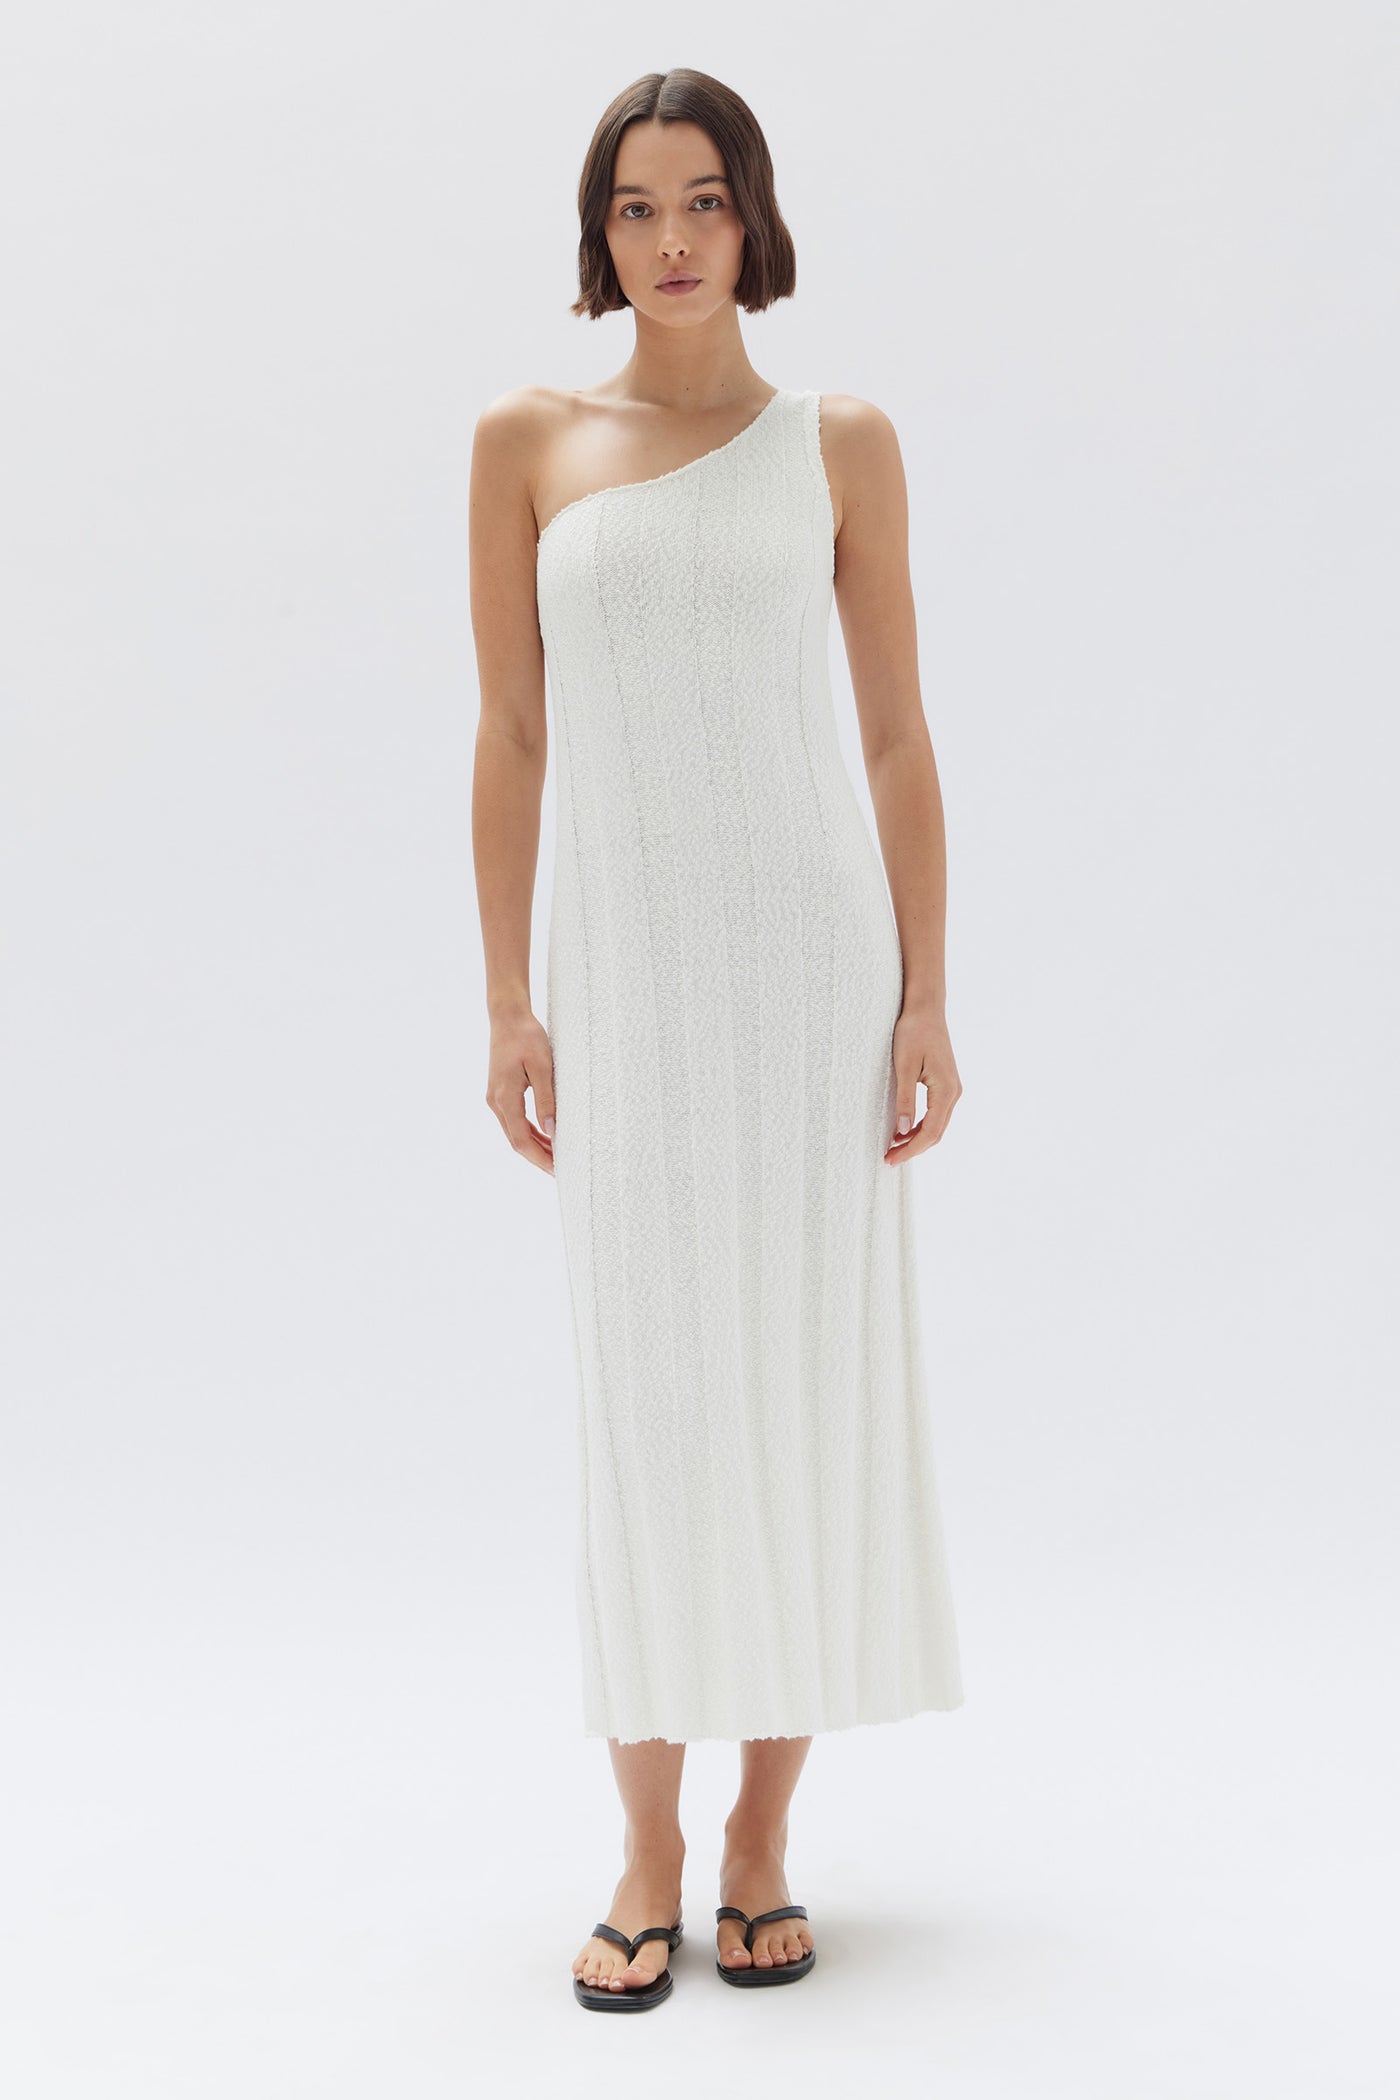 Assembly Label Caitlin Knit Rib Dress - Antique White